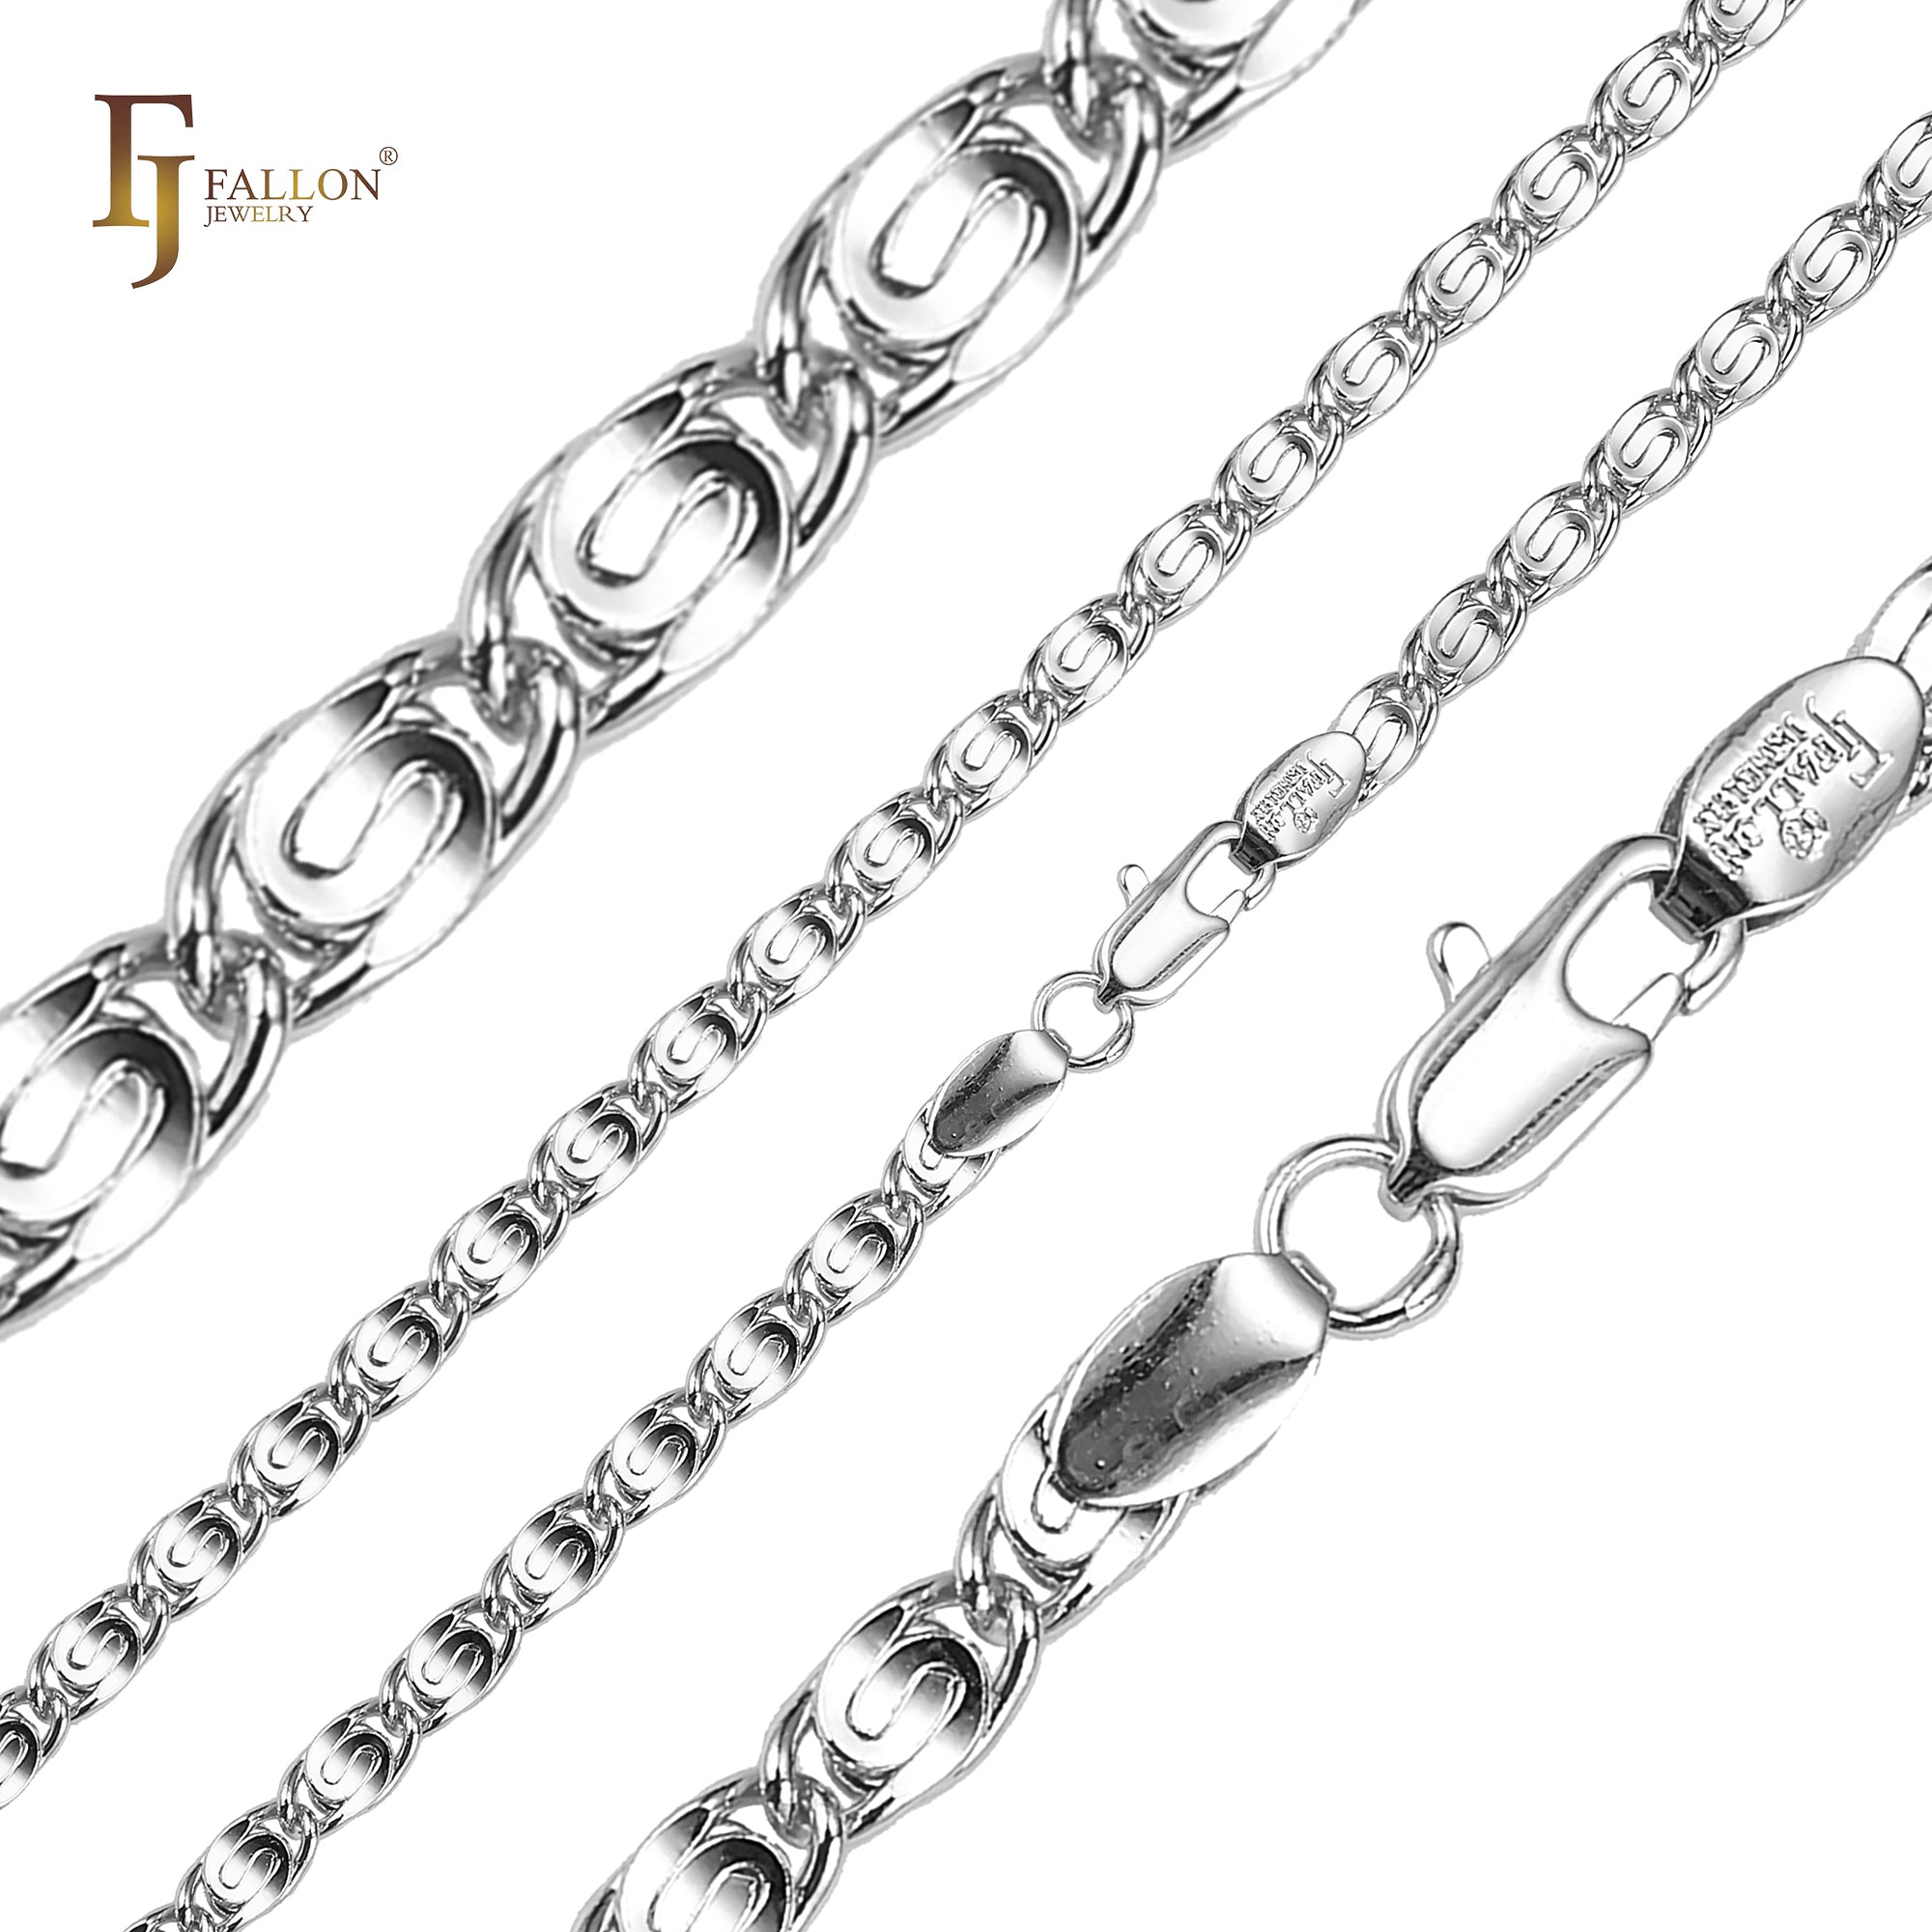 Classic flattened Snail link chains plated in 14K Gold, Rose Gold, White Gold, 18K Gold